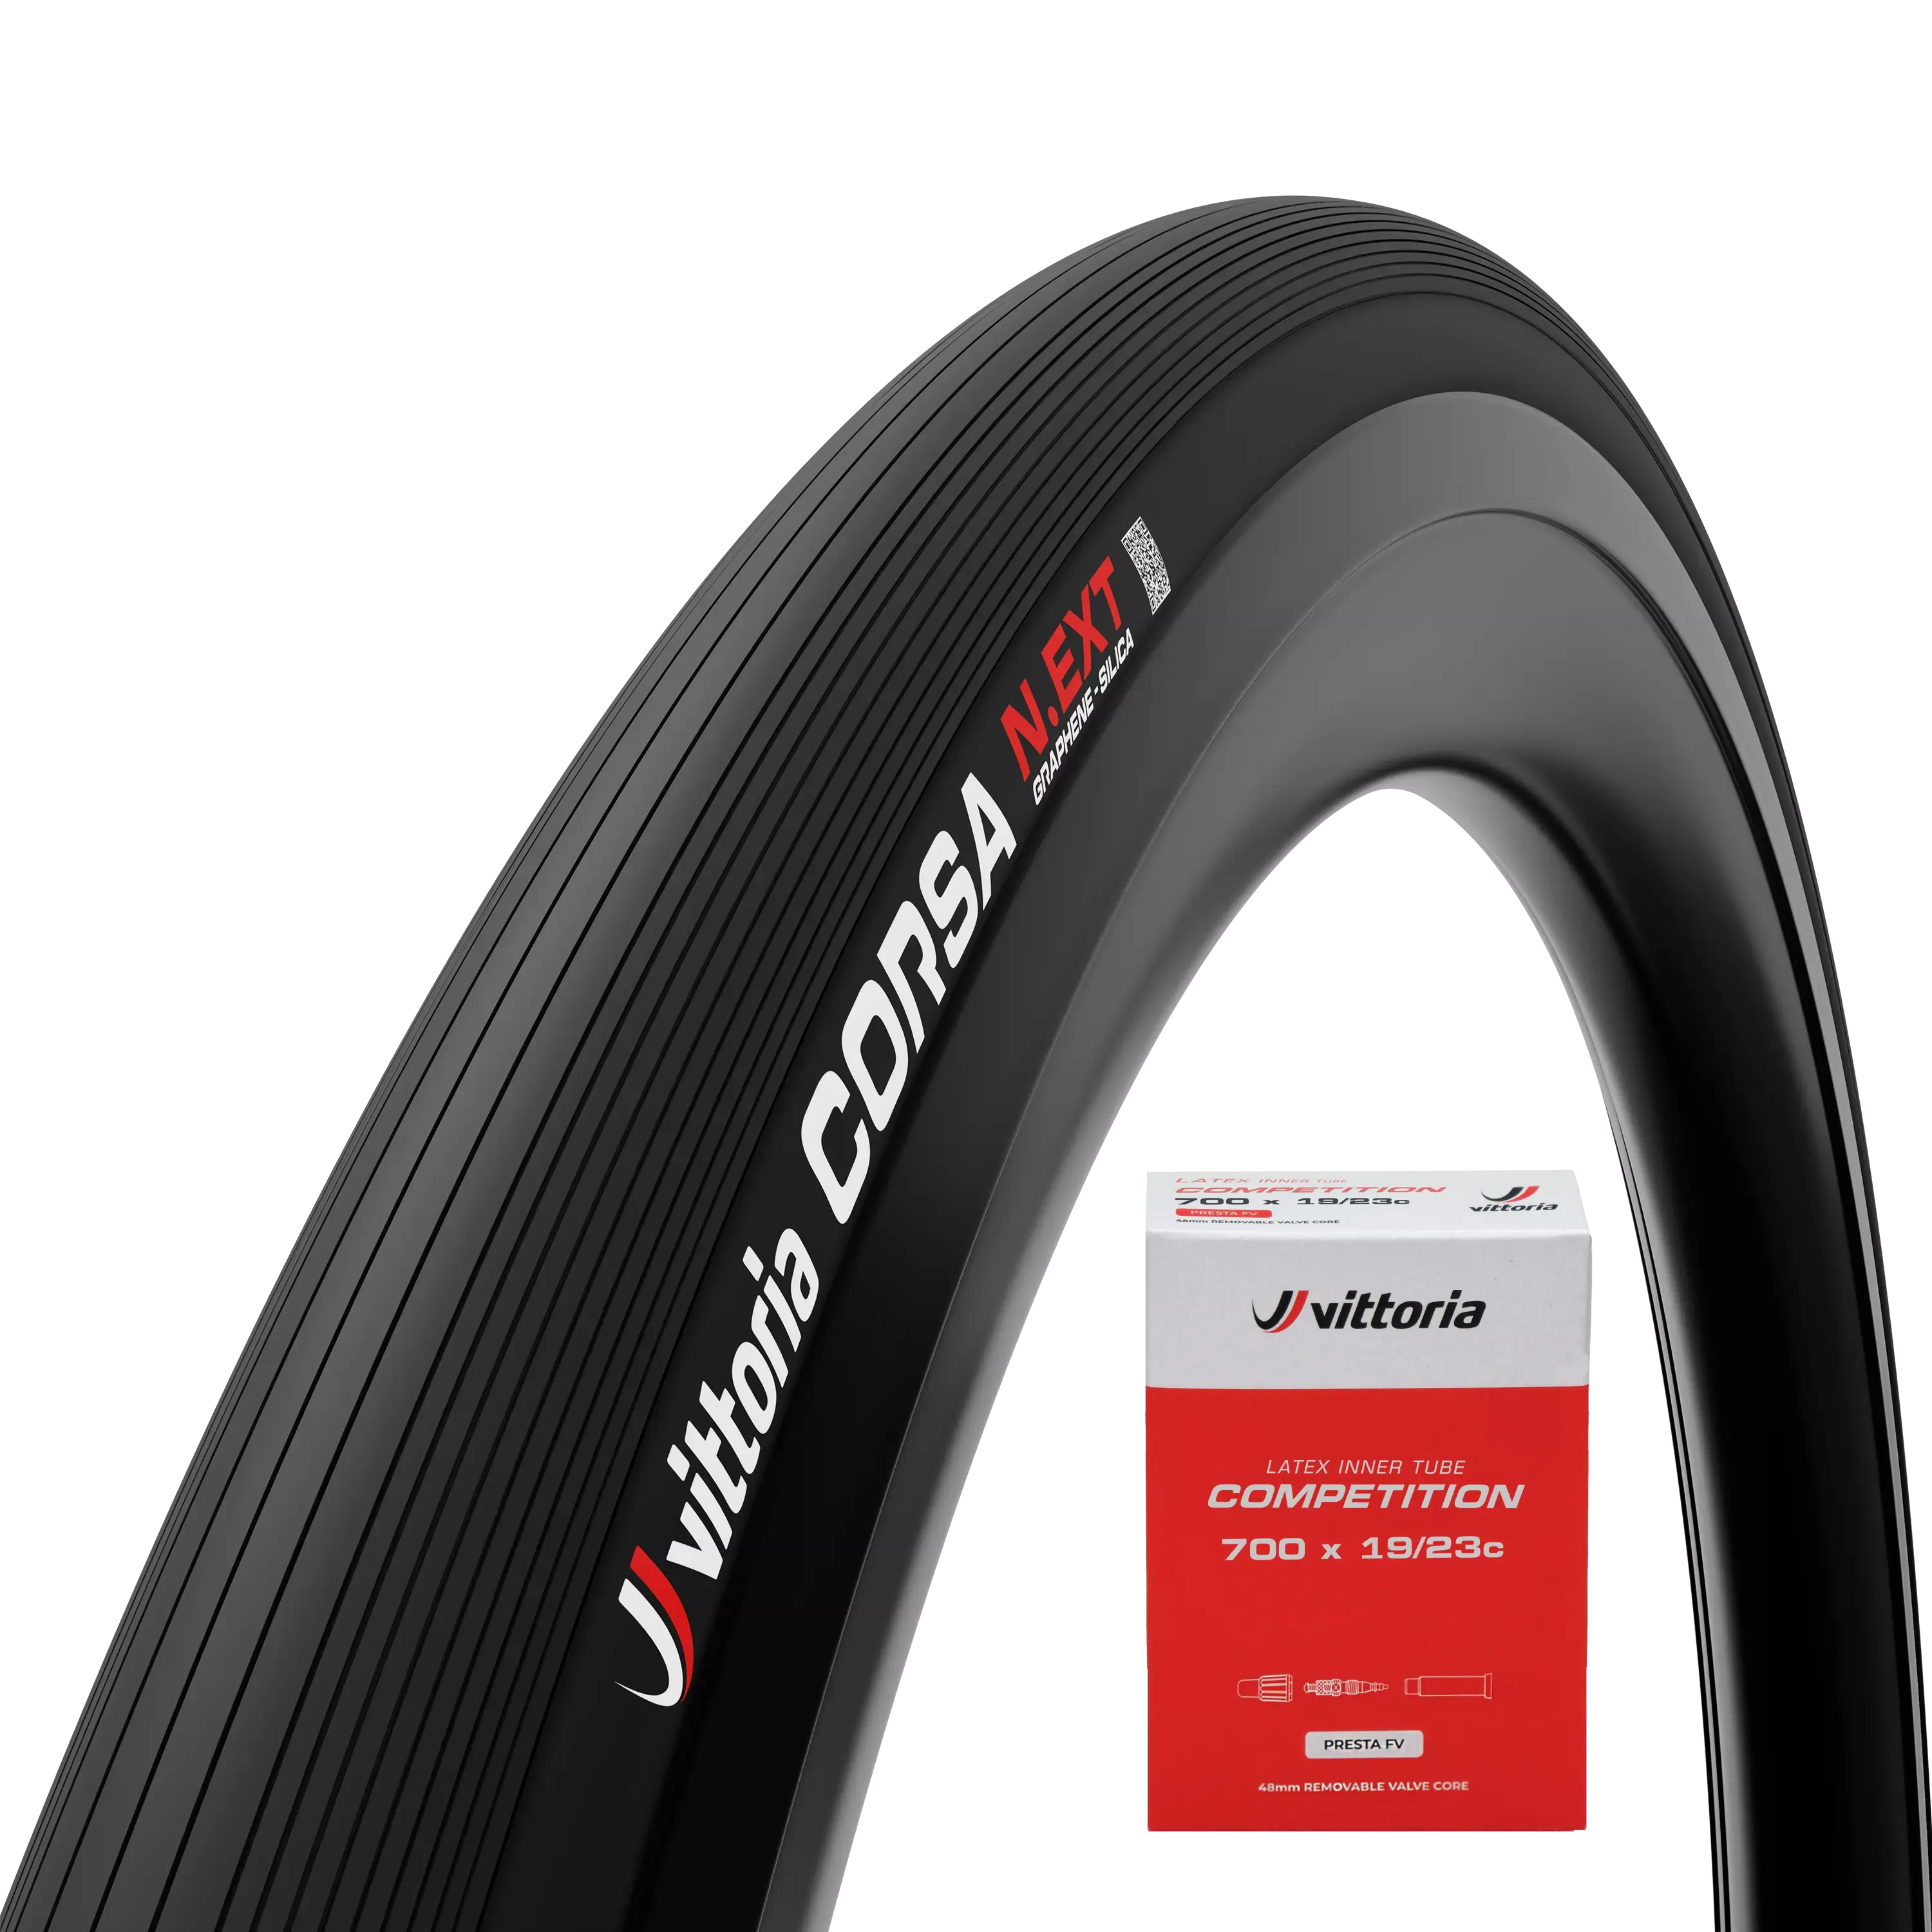 Corsa N.Ext + Competition Latex inner tube Bundle